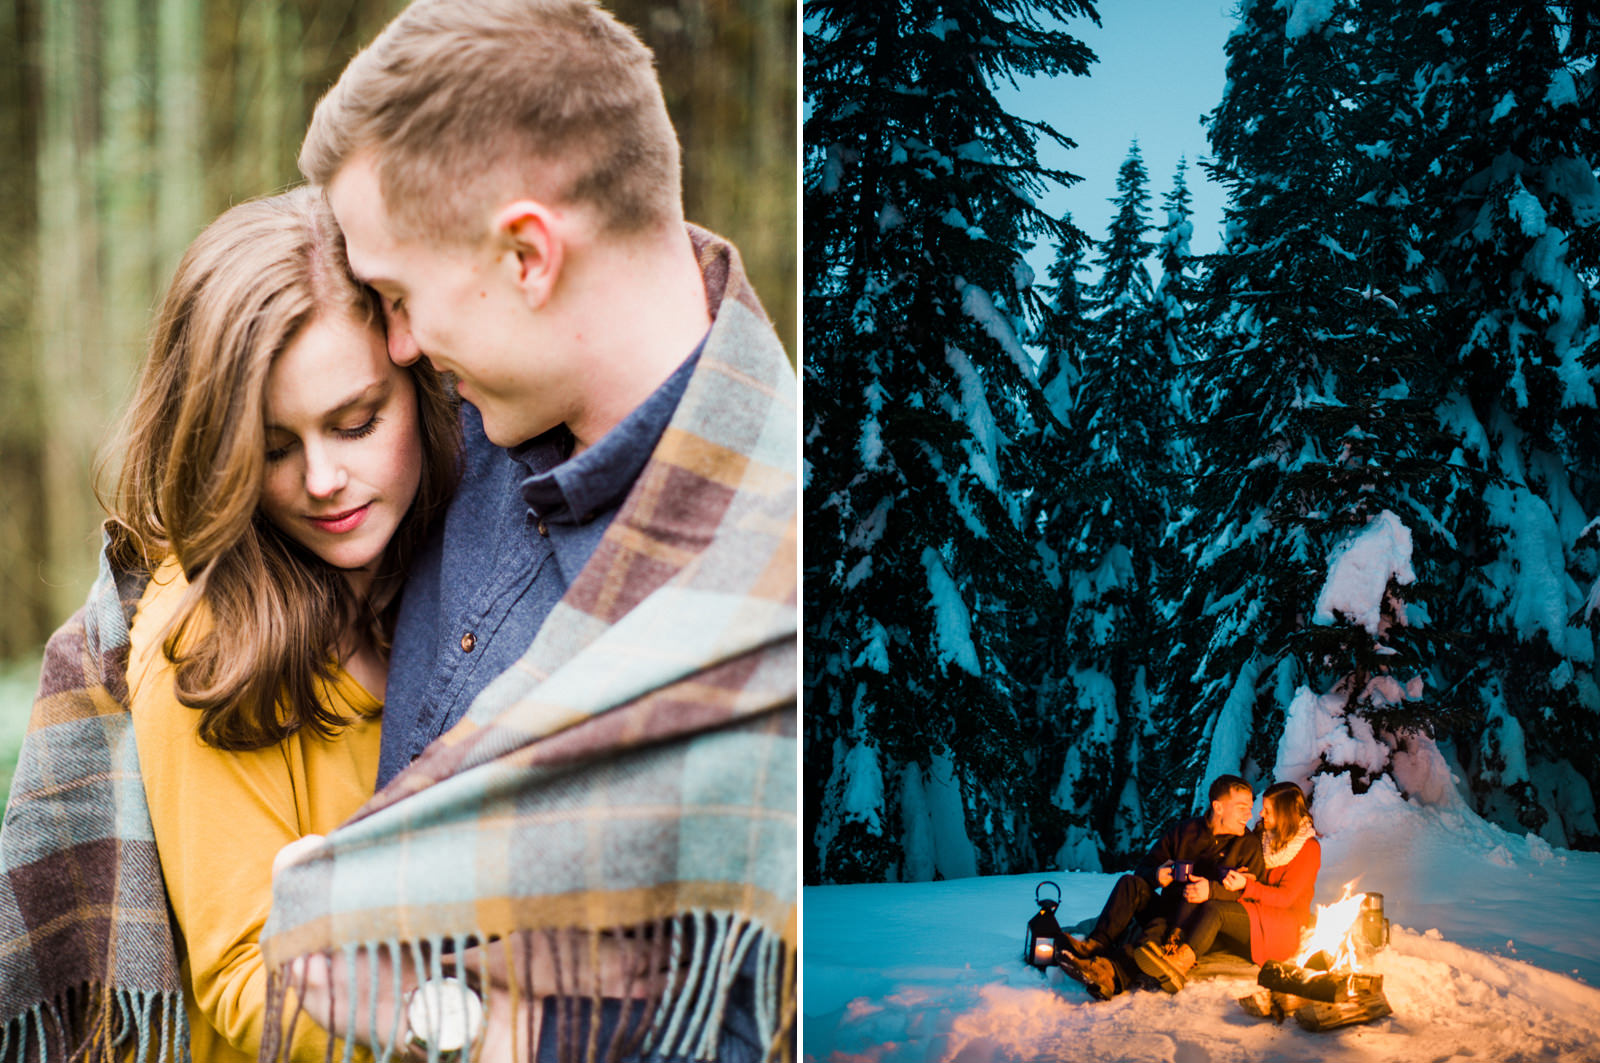 090-winter-engagement-shoot-in-the-snow-with-a-bonfire-by-ryan-flynn-photography.jpg